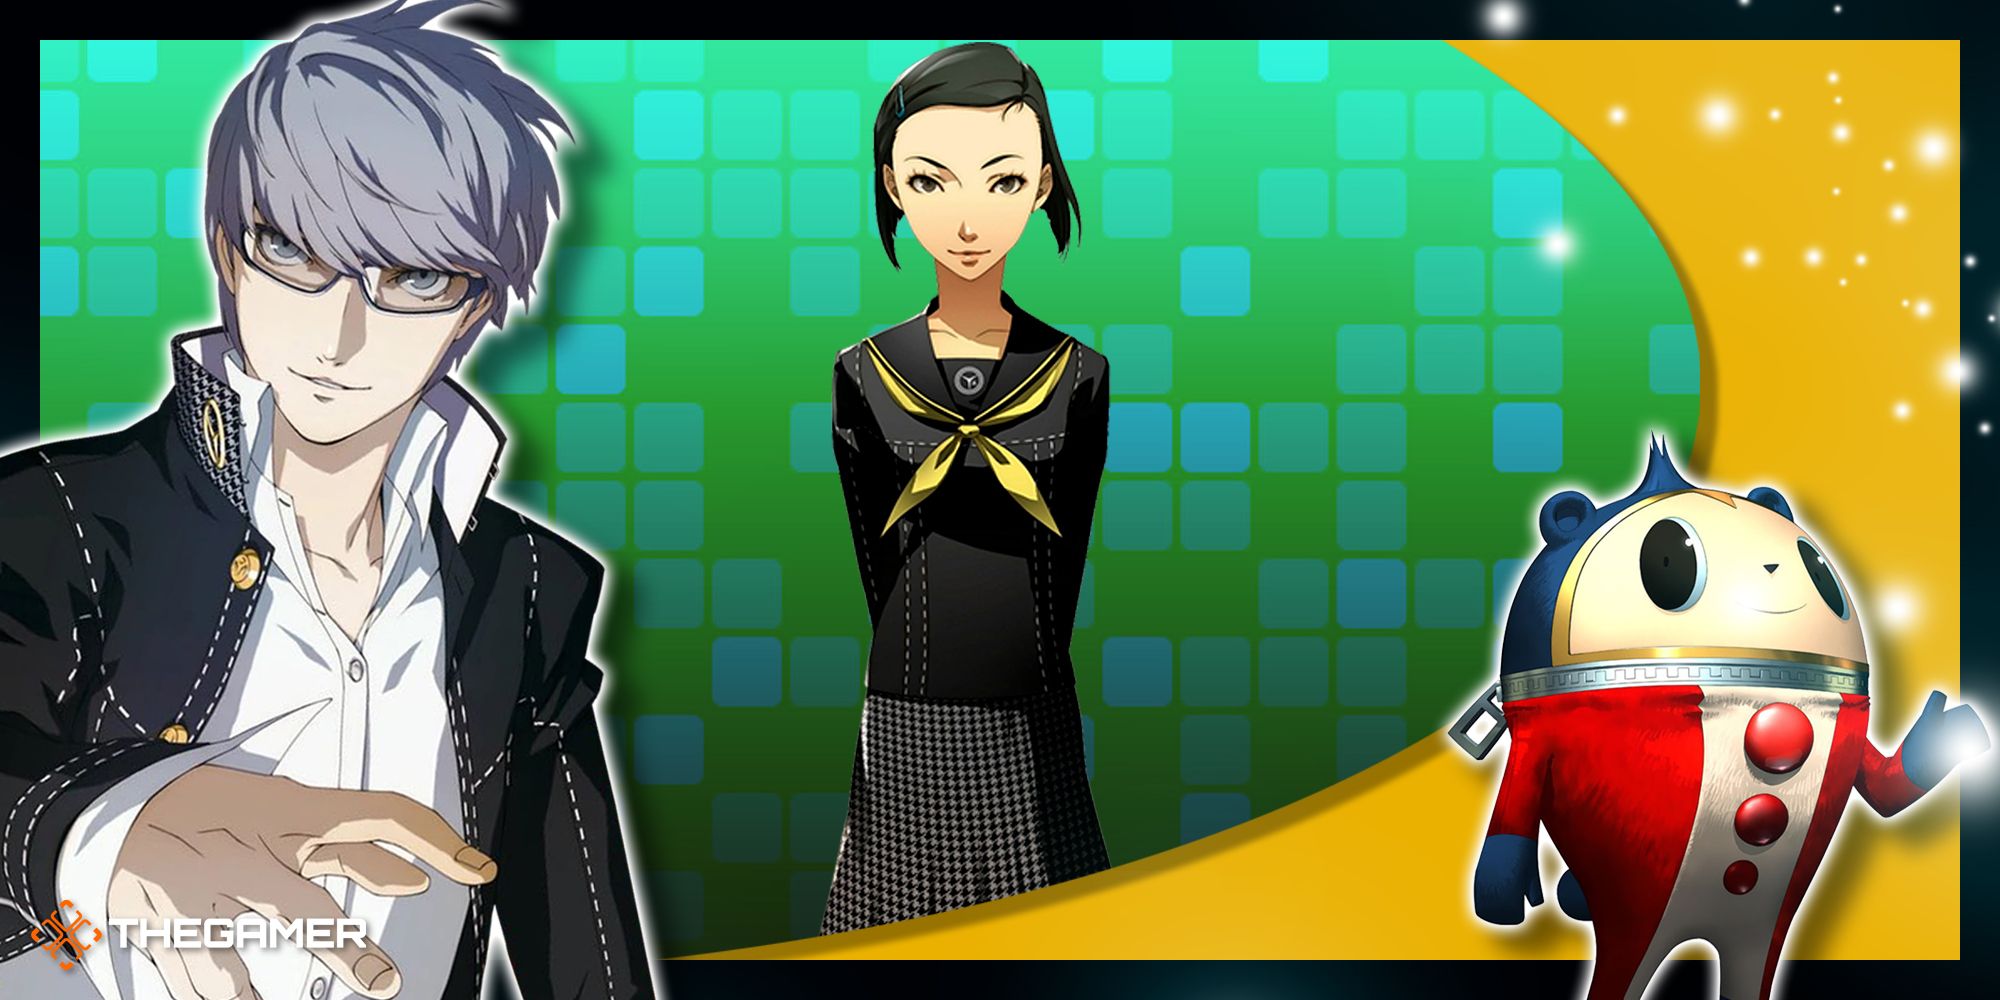 Persona 4 Golden- A collage of Yu, Yumi, and Teddie.